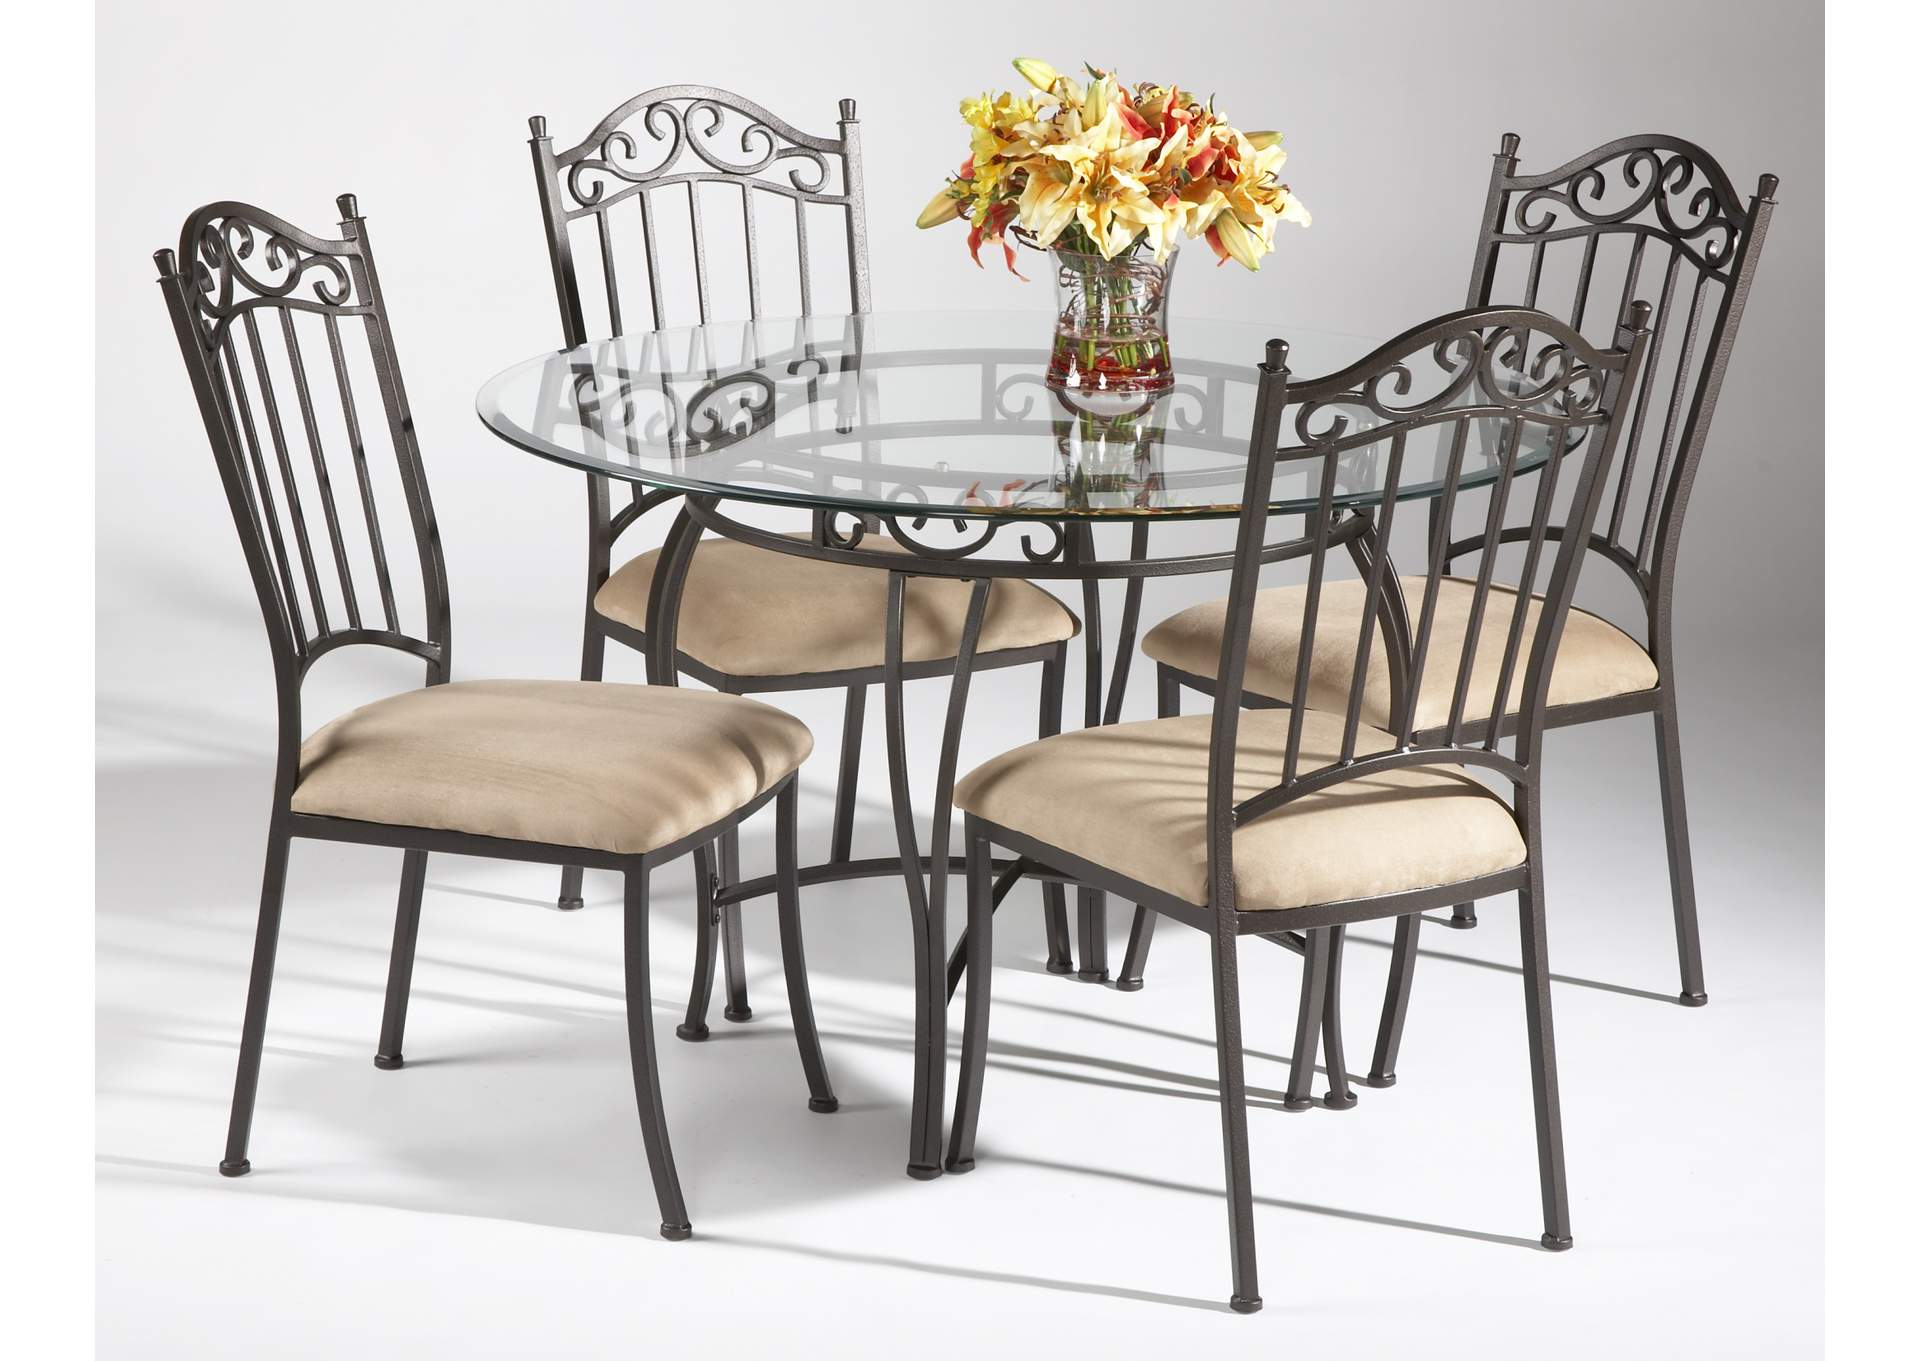 Wrought Iron Base Harlem Furniture, Vintage Wrought Iron Round Table And Chairs